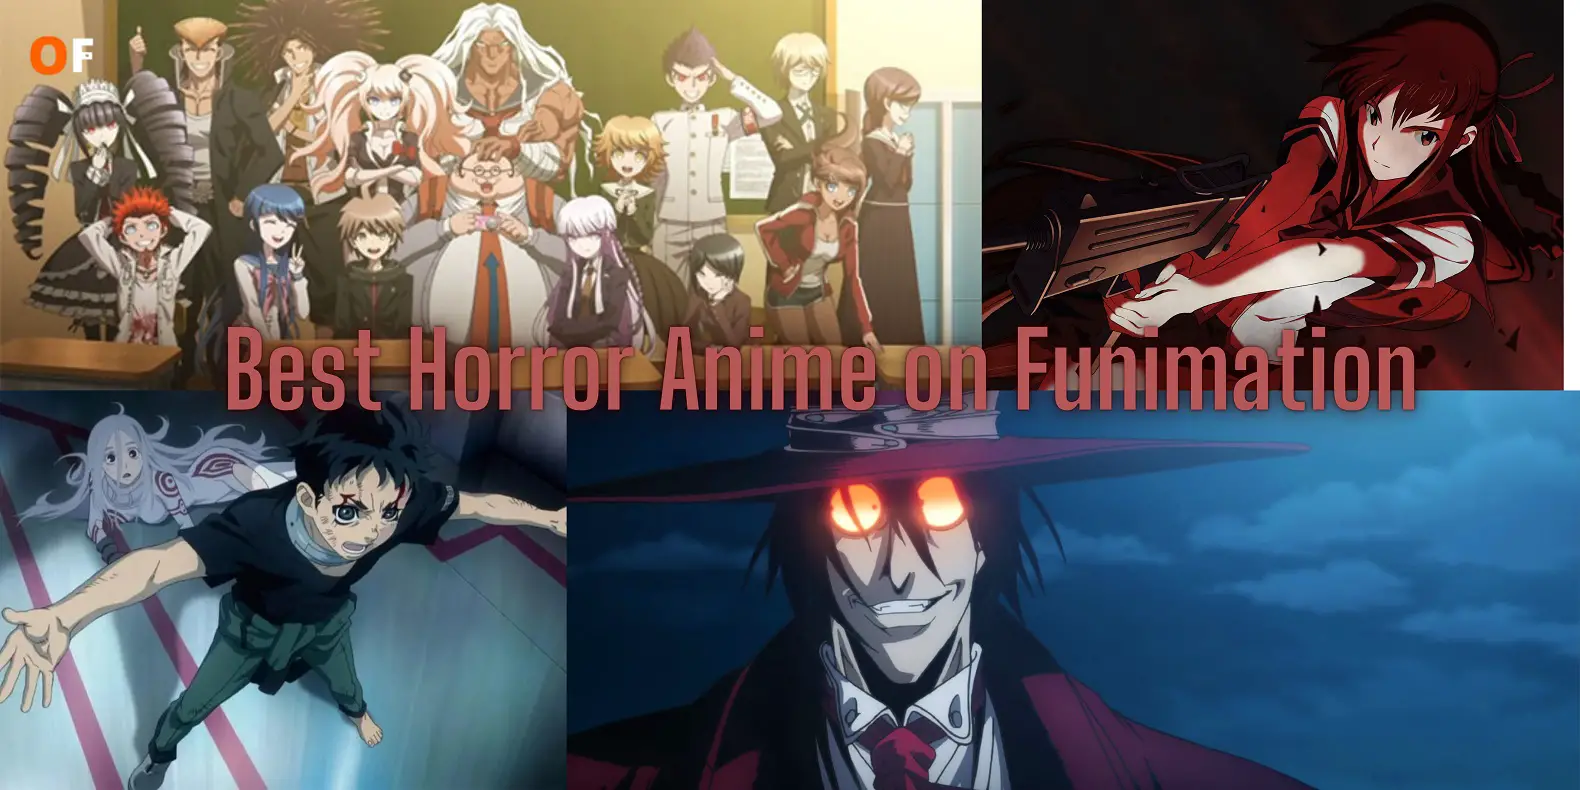 Funimation - Watch Anime Streaming Online-demhanvico.com.vn